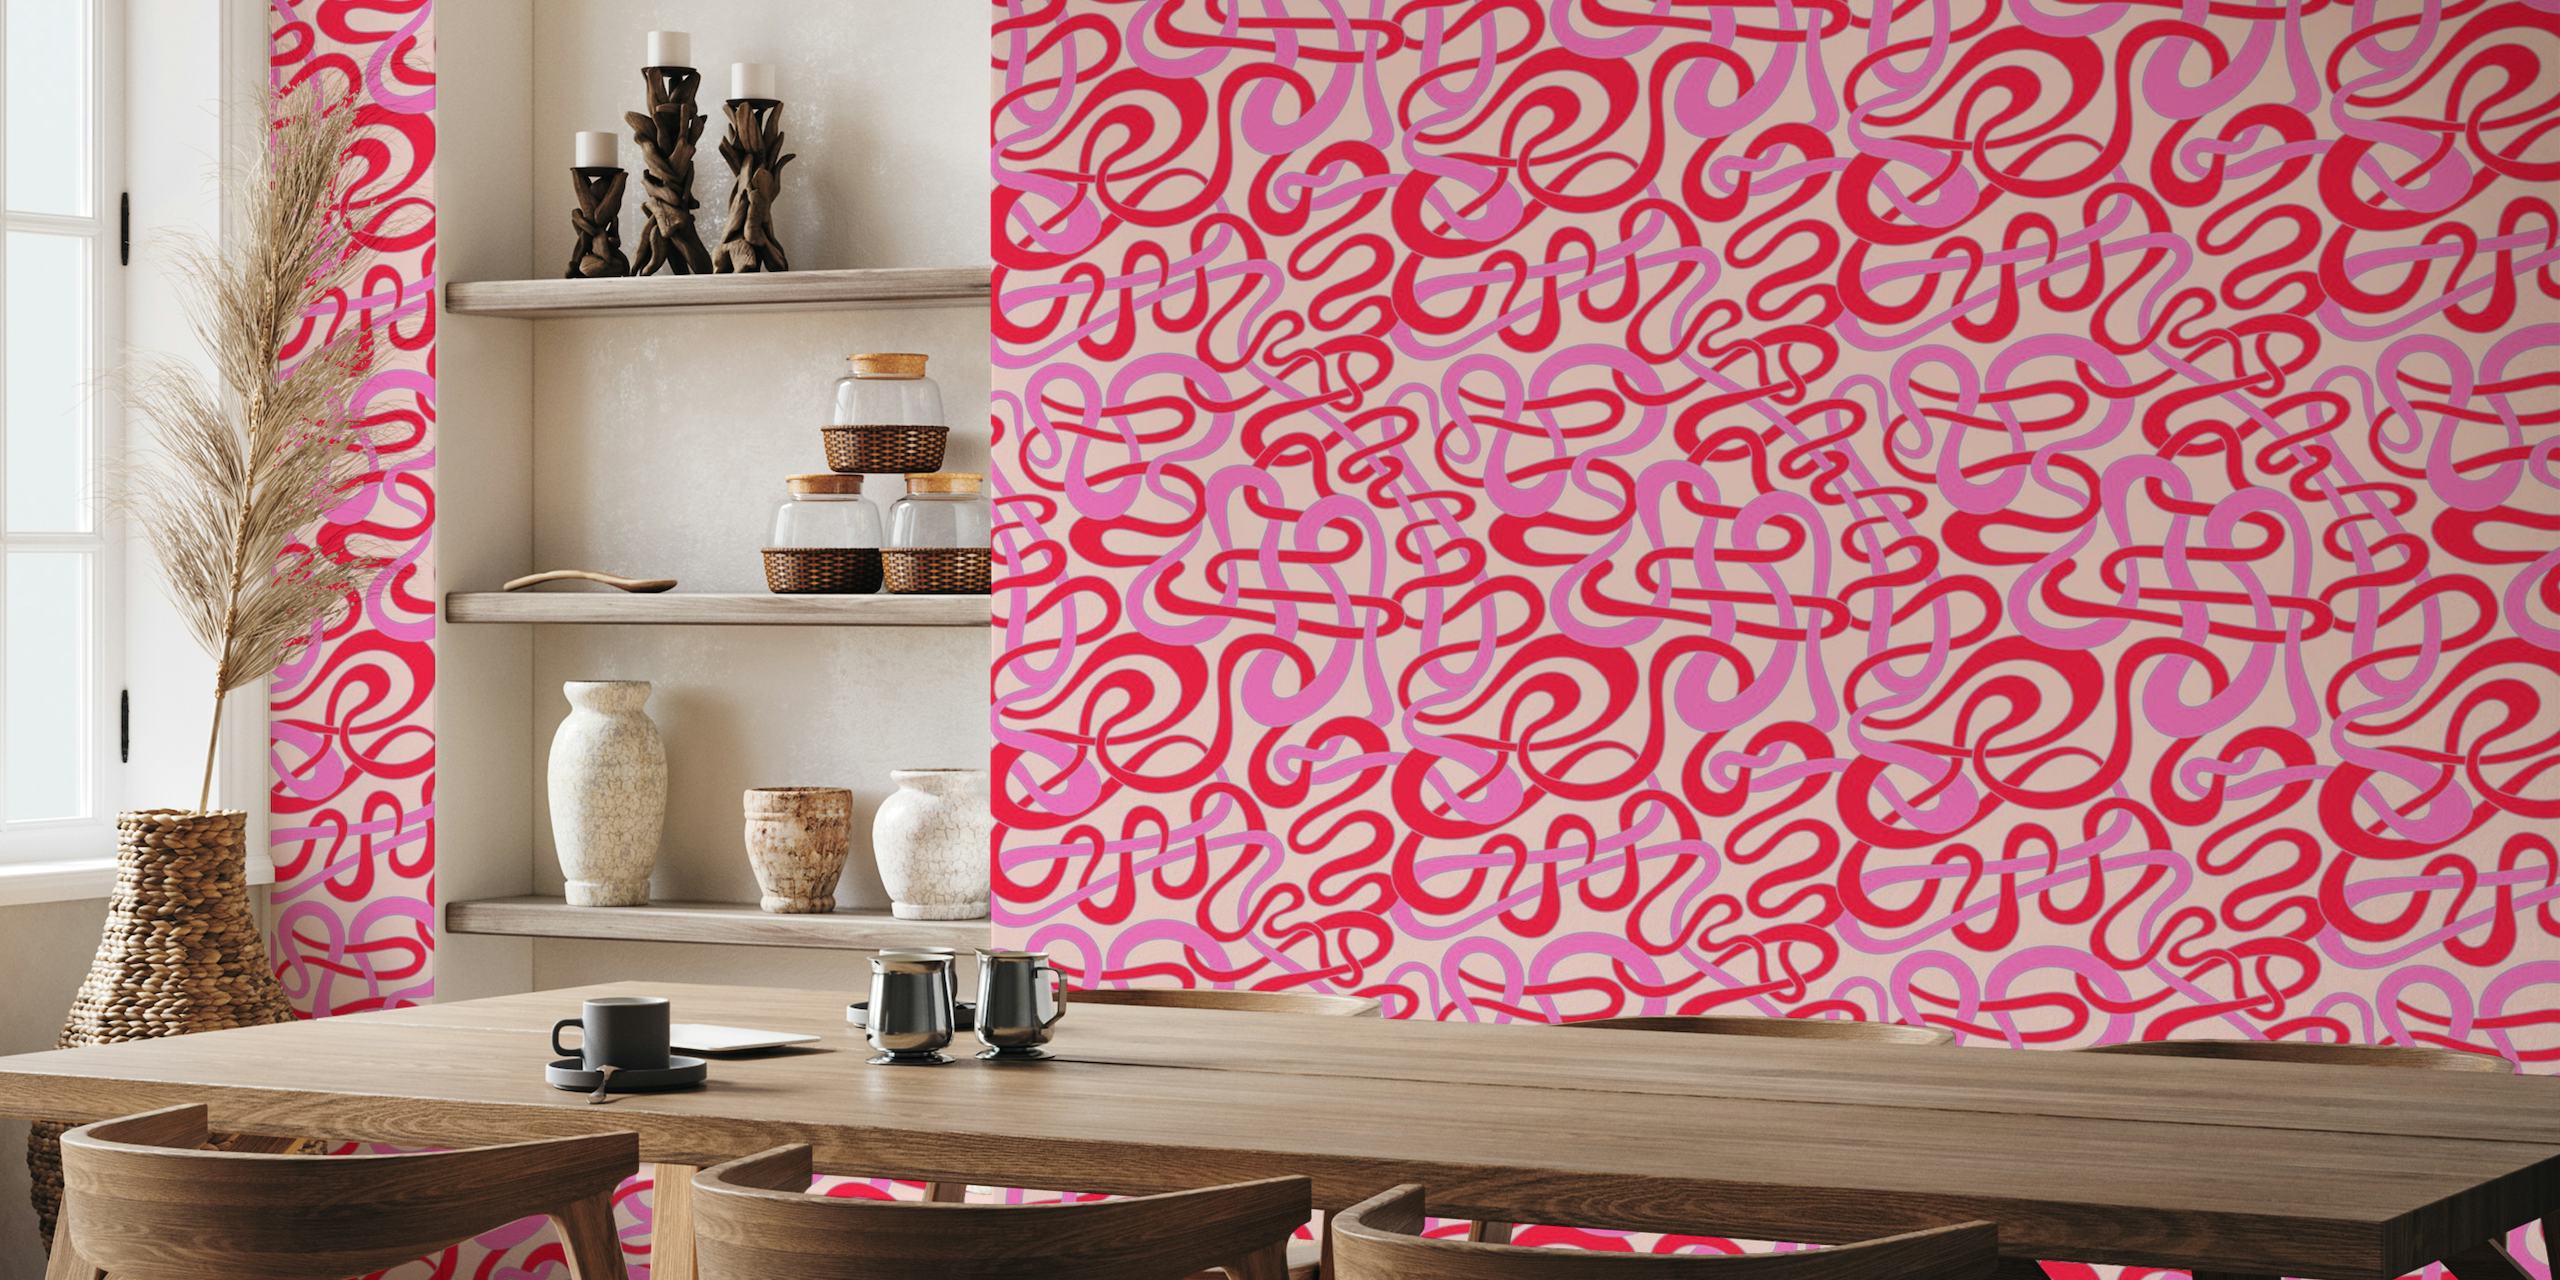 TANGLED STRIPES Abstract Hot Fuchsia Pink Red behang